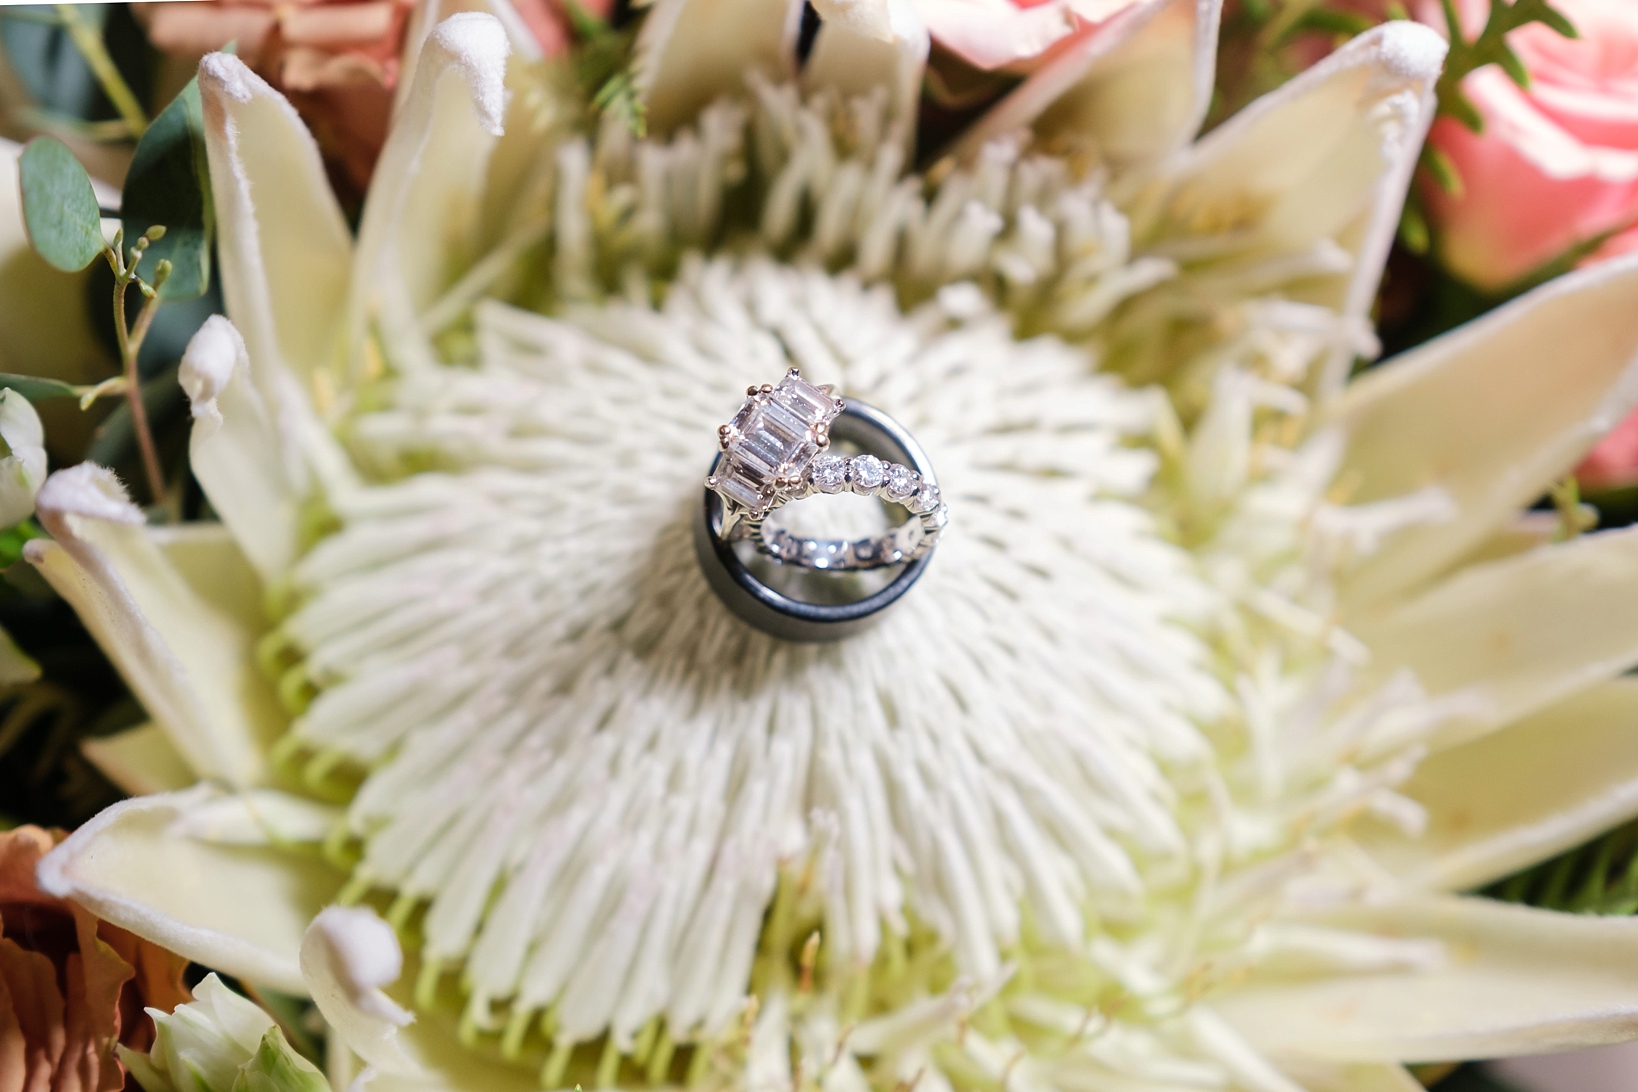 The wedding bands photographed on the Brides floral bouquet 